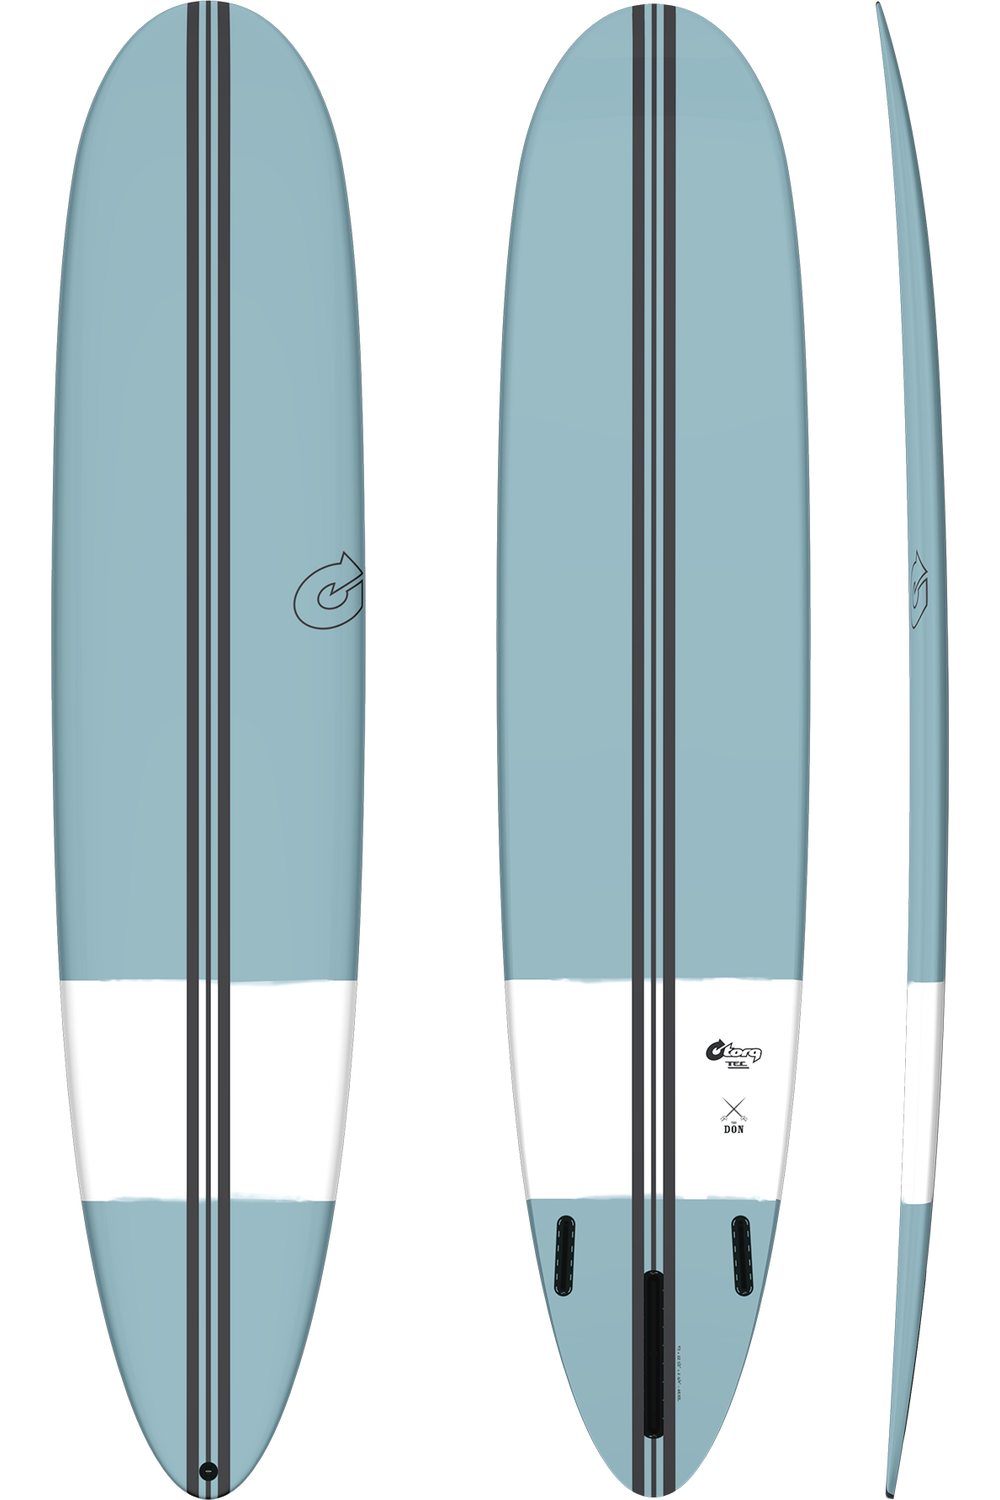 The Don / Don XL - Torq Surfboards